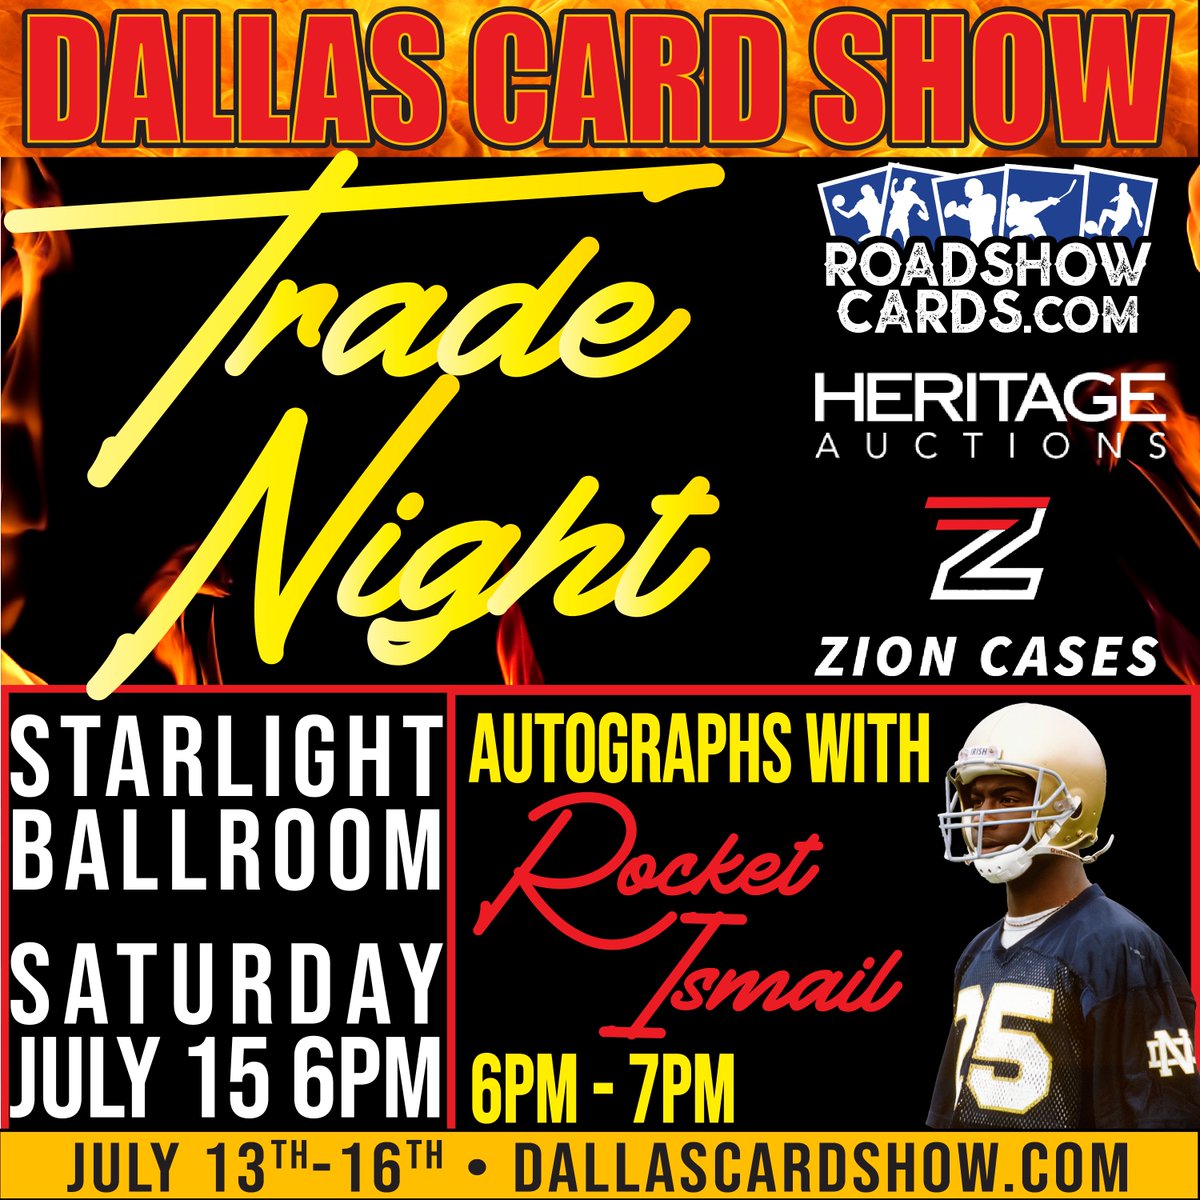 Get your tickets for Trade Night at the Dallas Card Show July 15th with autograph guest @iamrocketismail starting at 6 pm 🔥